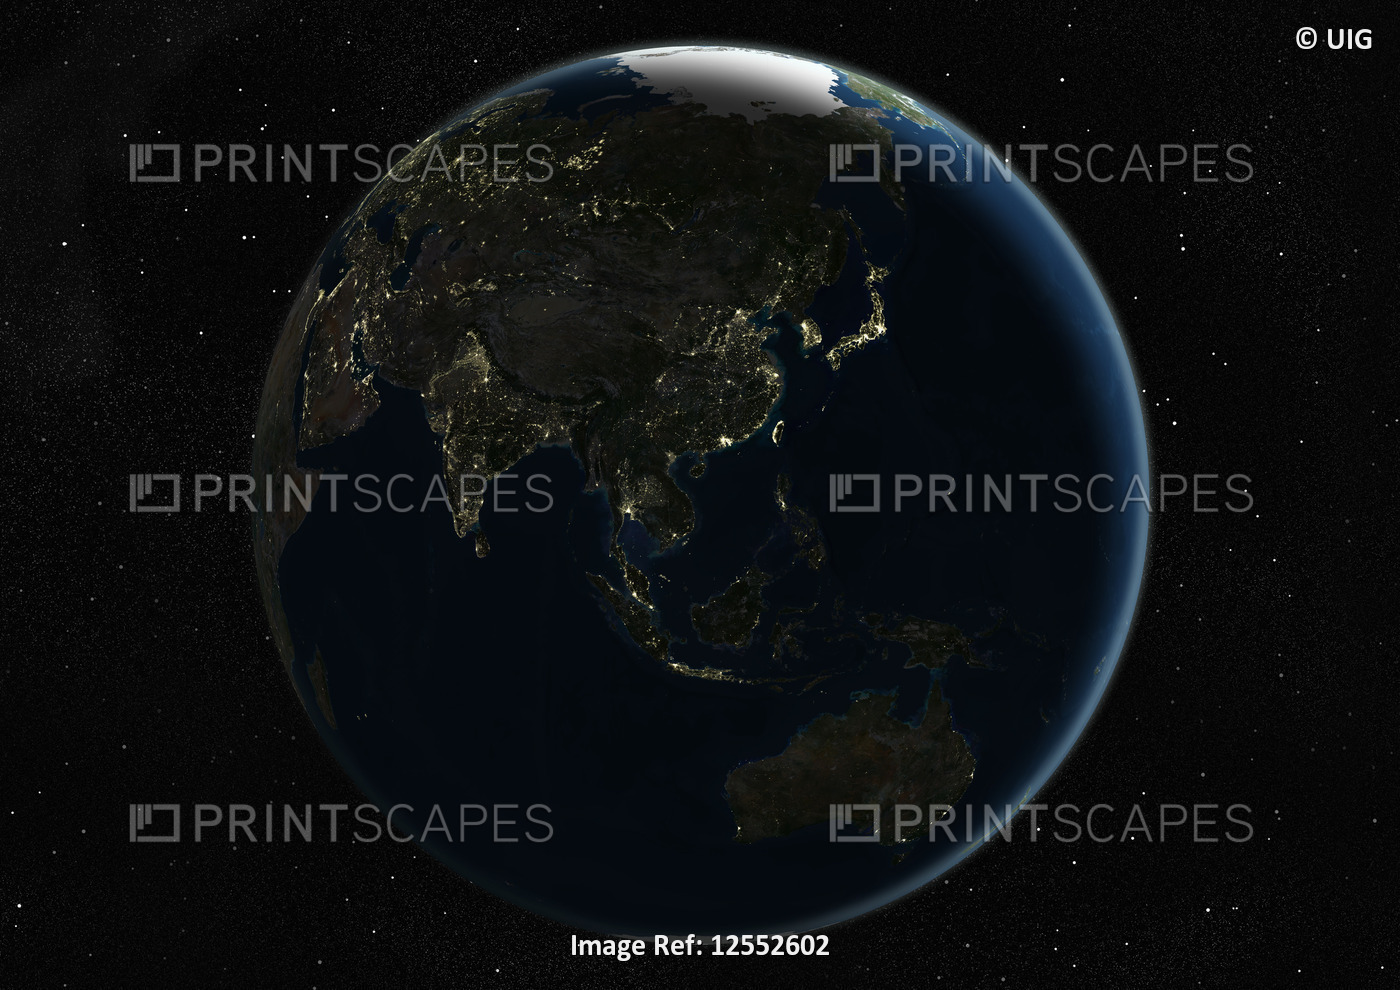 Globe Centred On Asia And Oceania, True Colour Satellite Image Of The Earth